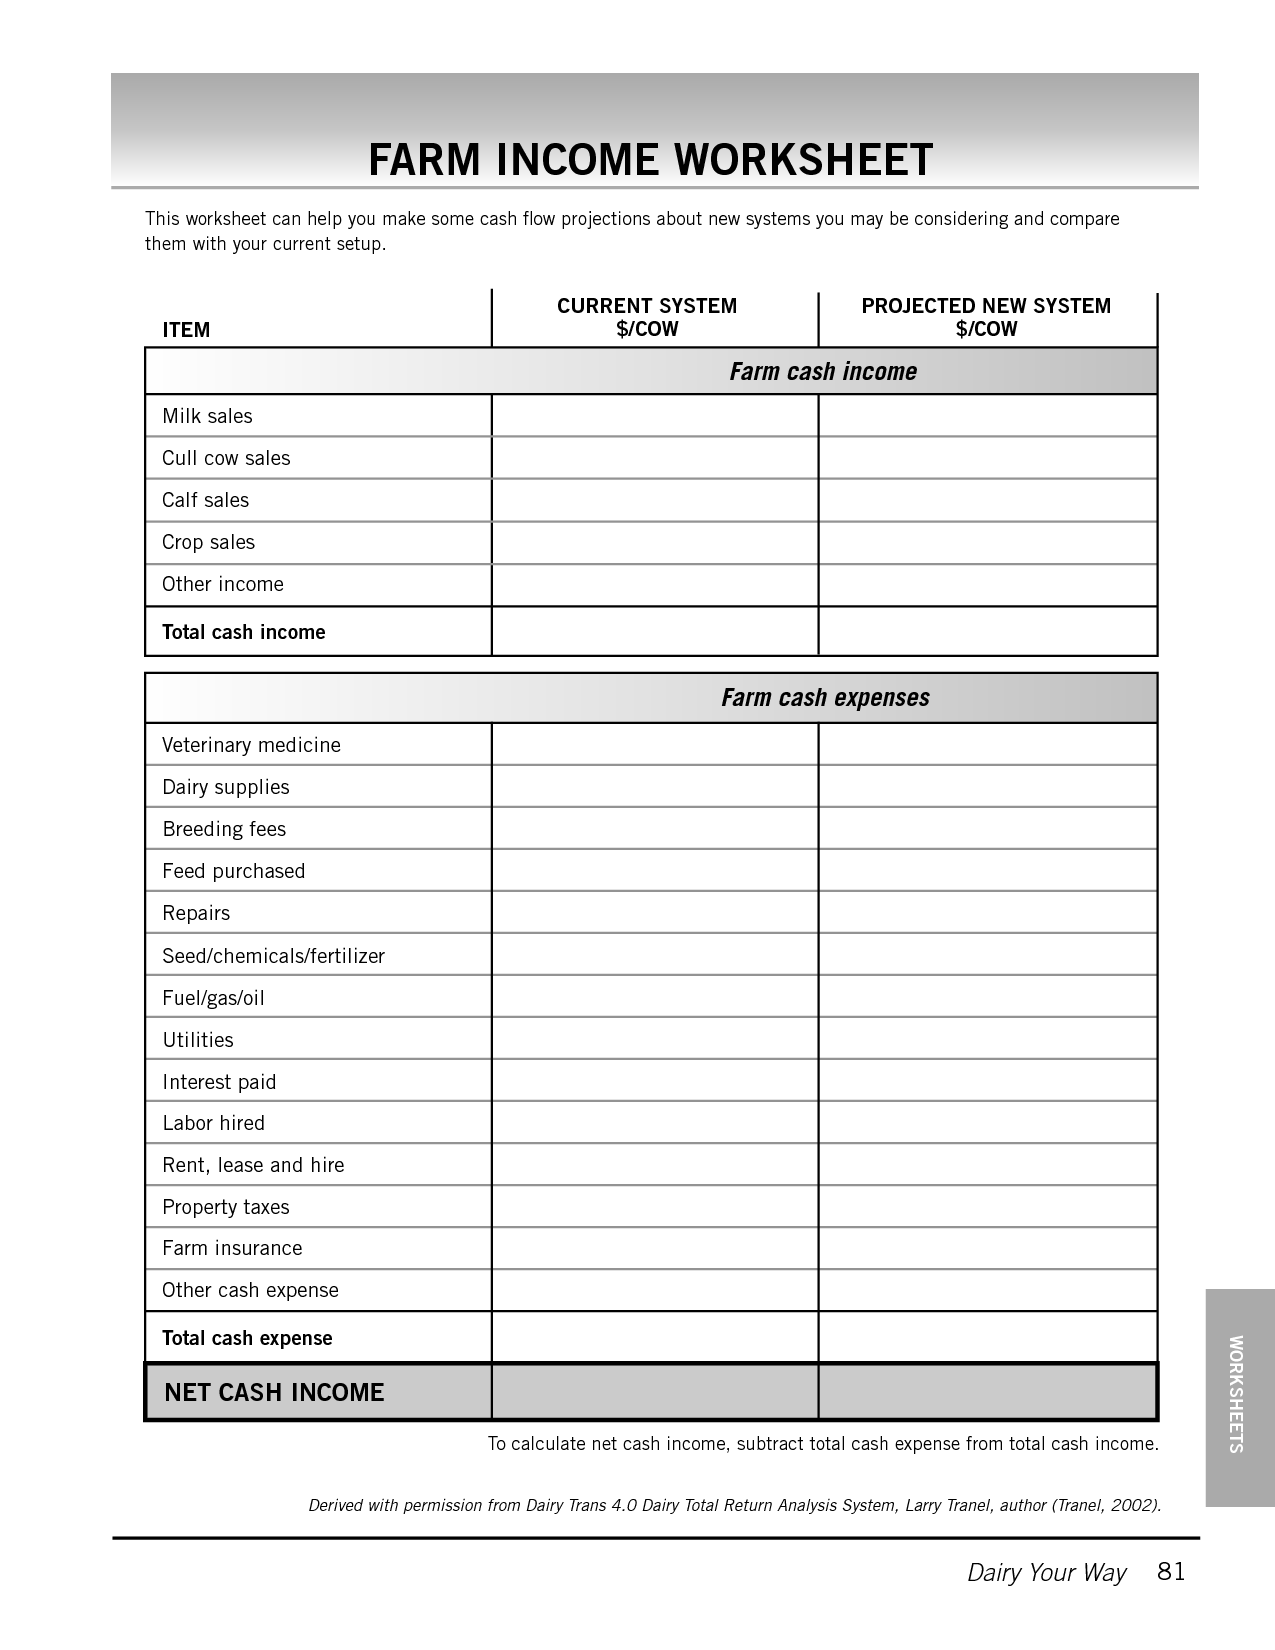 17 Best Images of Science Tools Worksheet - Classifying Living Things